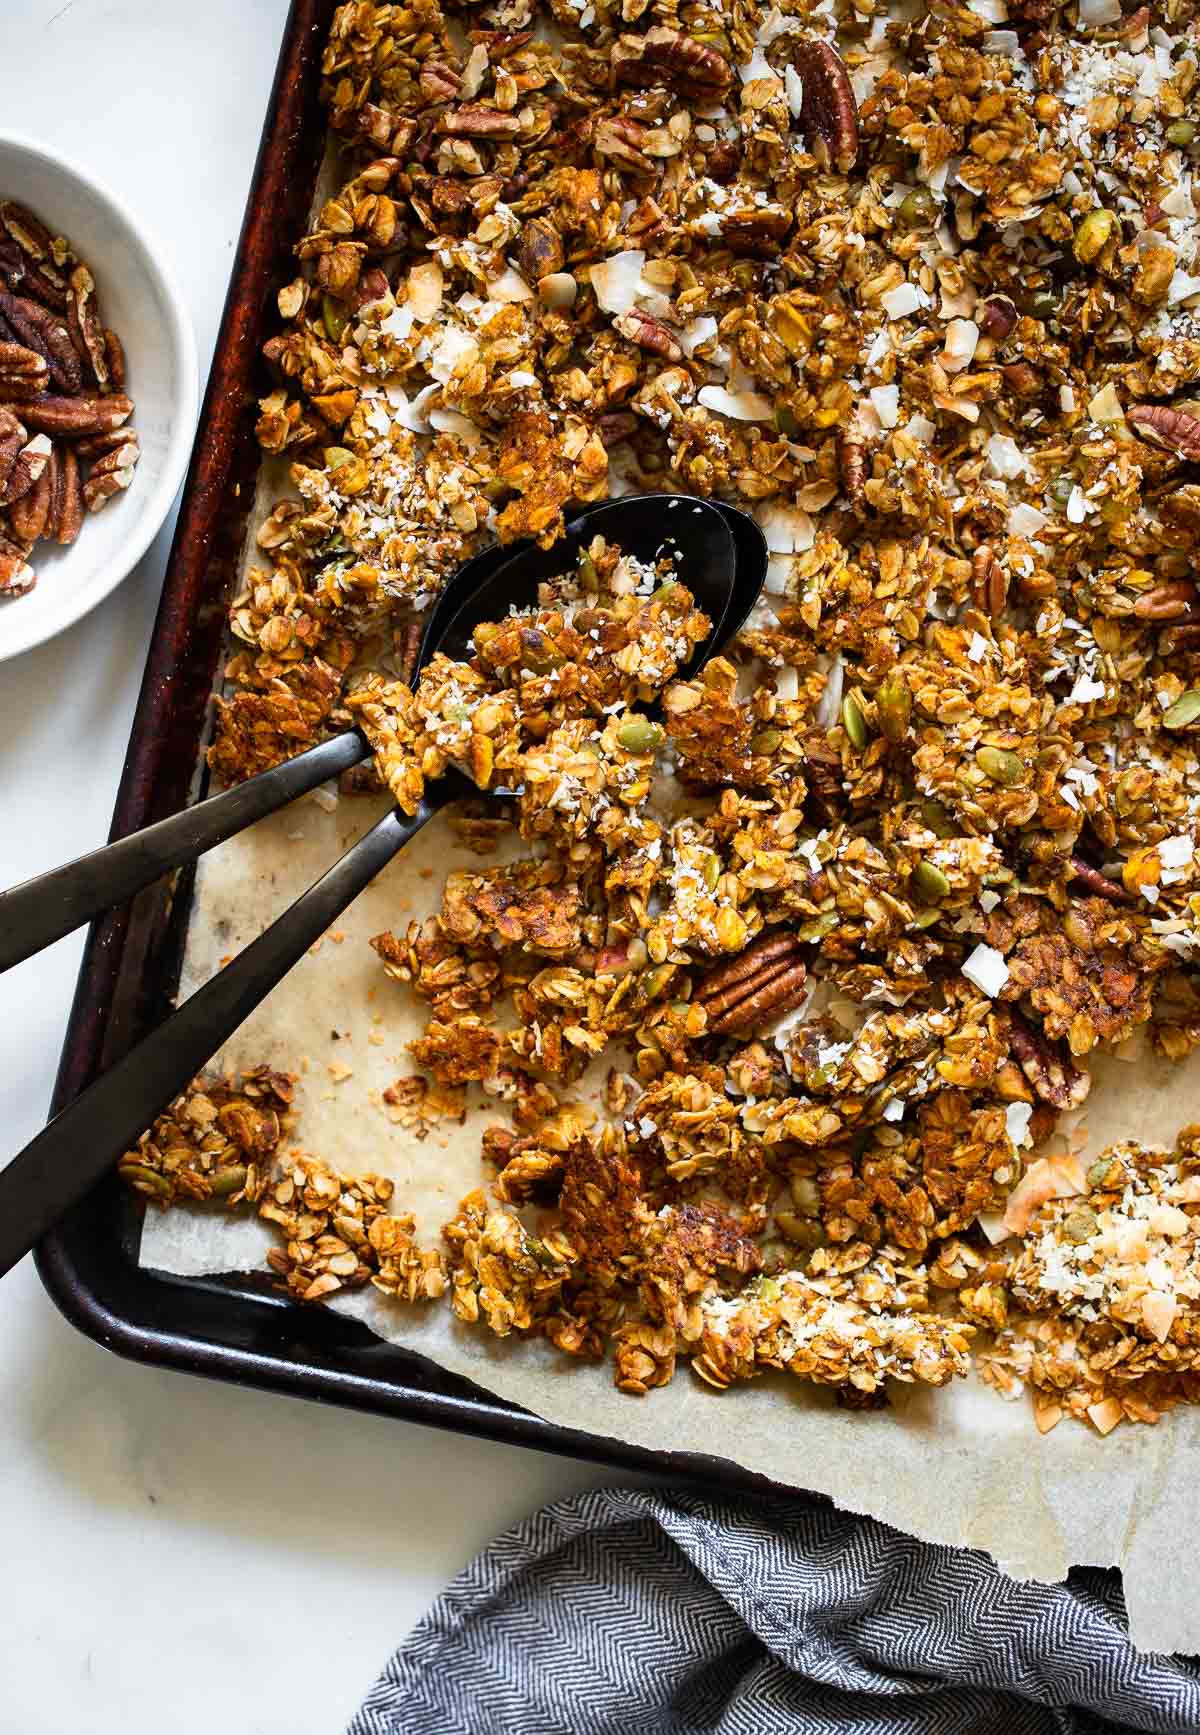 After baking, allow granola to cool completely before breaking apart into chunks.